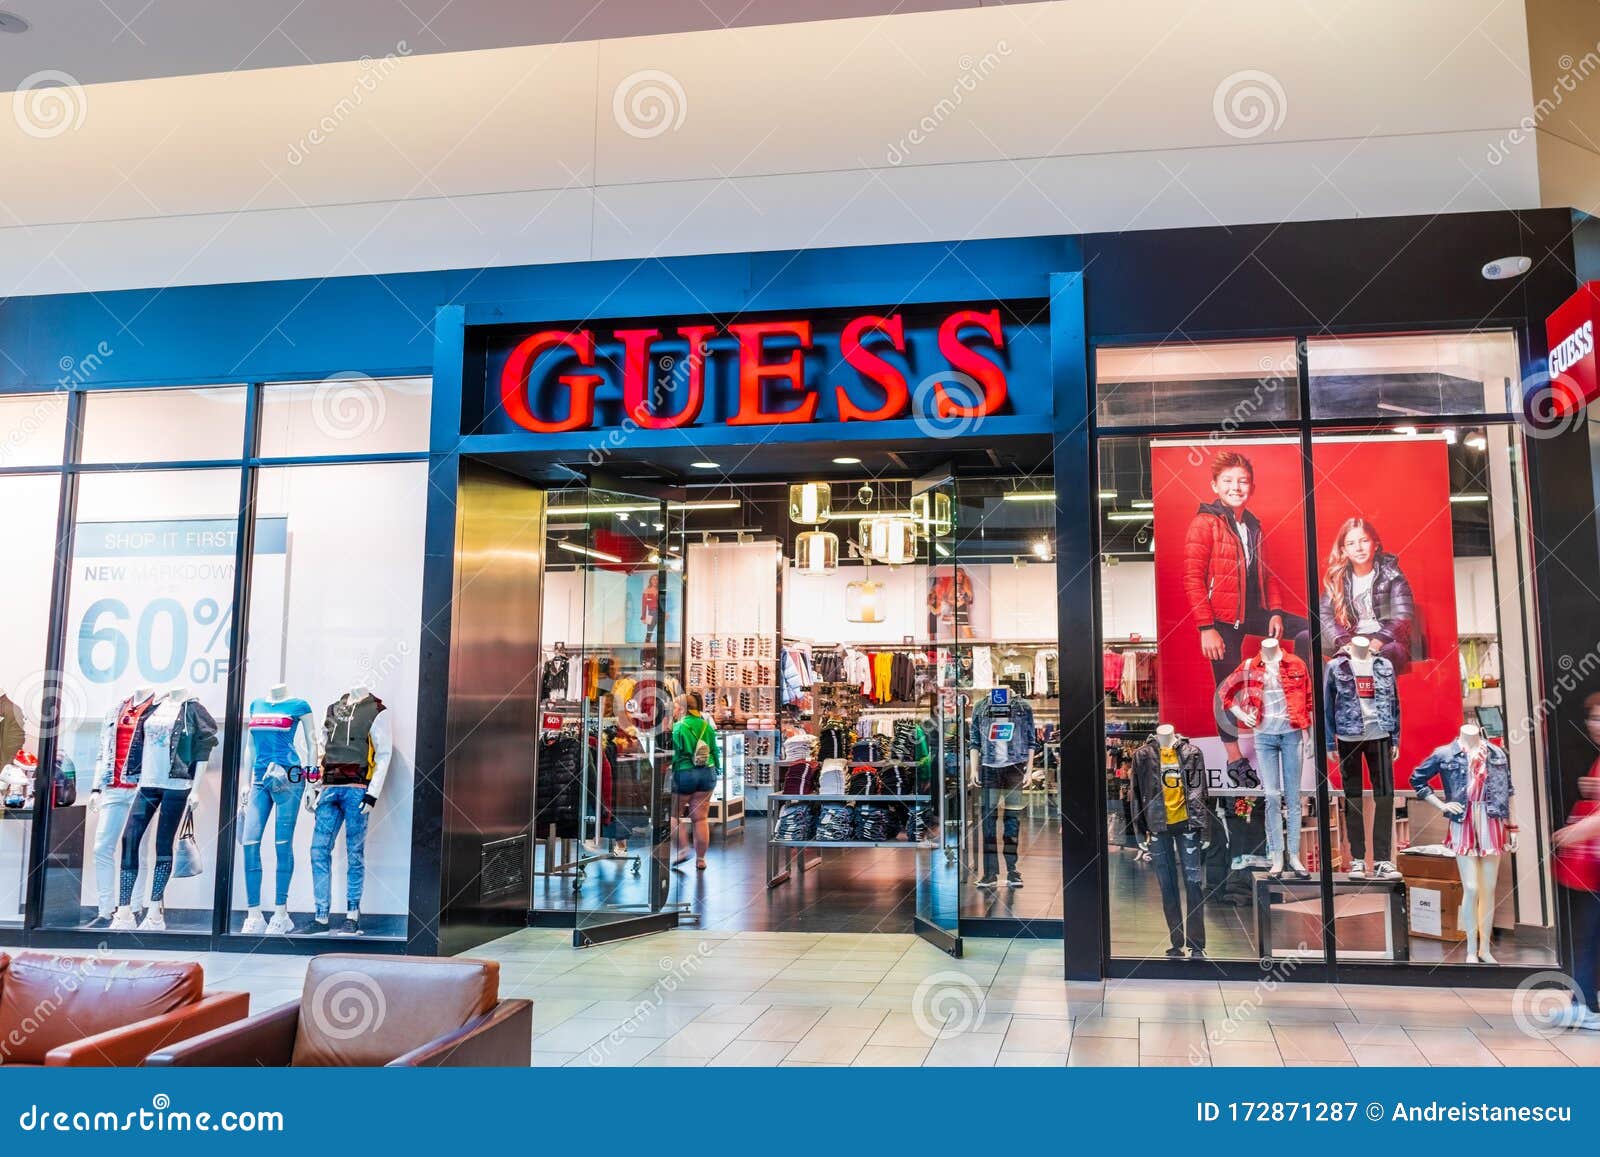 Guess Photos - & Stock Photos from Dreamstime